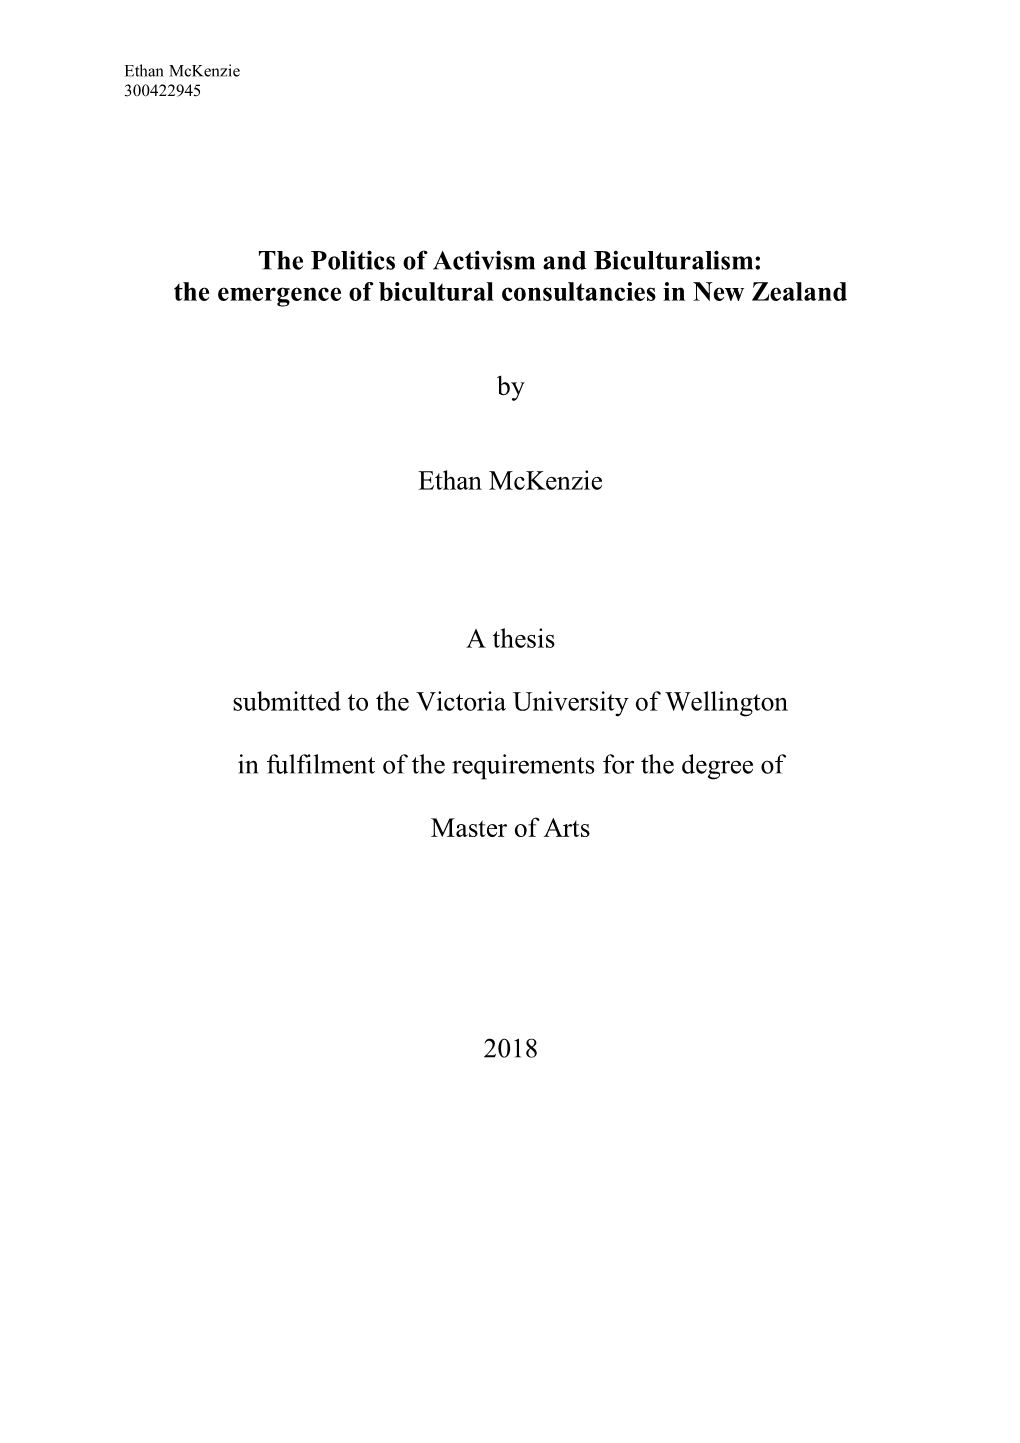 The Emergence of Bicultural Consultancies in New Zealand